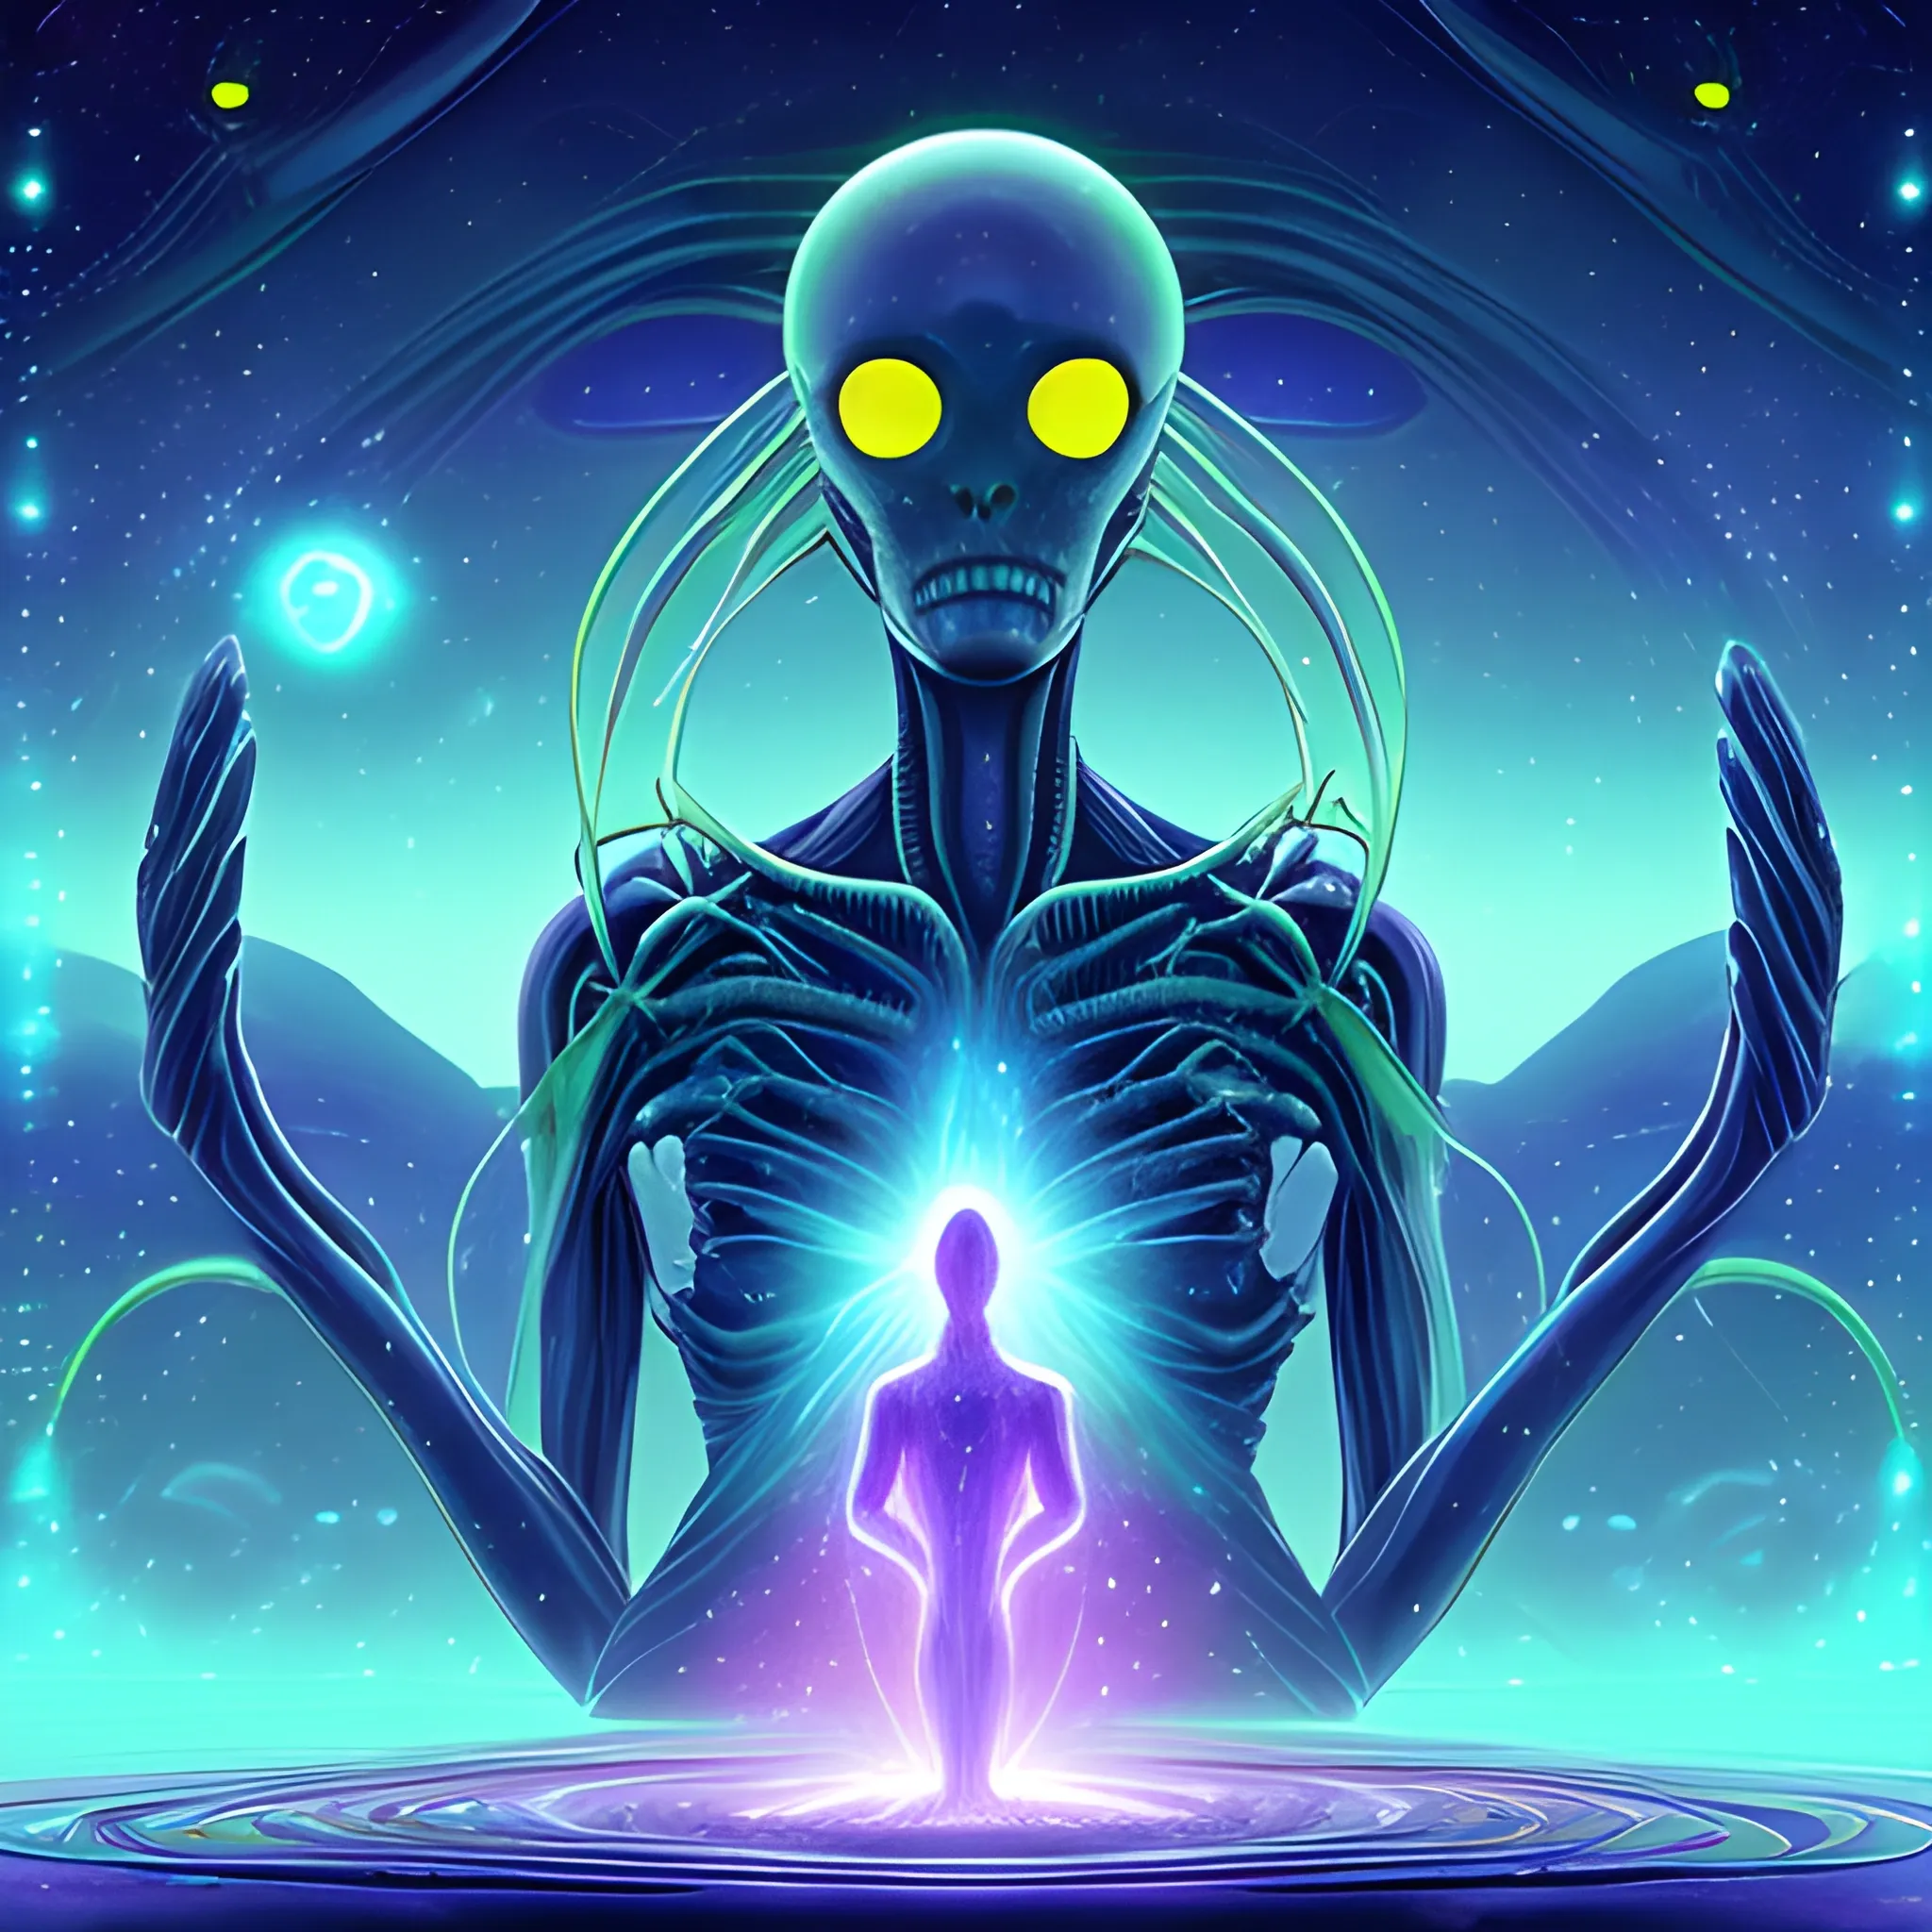 Otherworldly Greeting, Unearthly Presence, Cosmic Connection, Cinematic Encounter, Radiant Emanation, 3D Style, Alien Anime, width 960, height 540, seed: 566136464, step:60, version: SH_Deliberate